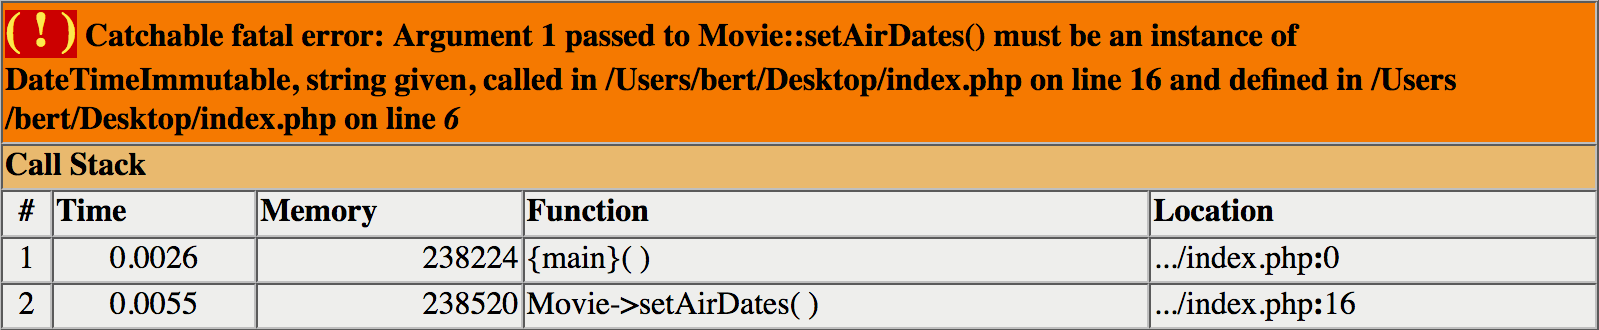 Catchable fatal error: Argument 1 passed to Movie::setAirDates() must be an instance of DateTimeImmutable, string given.